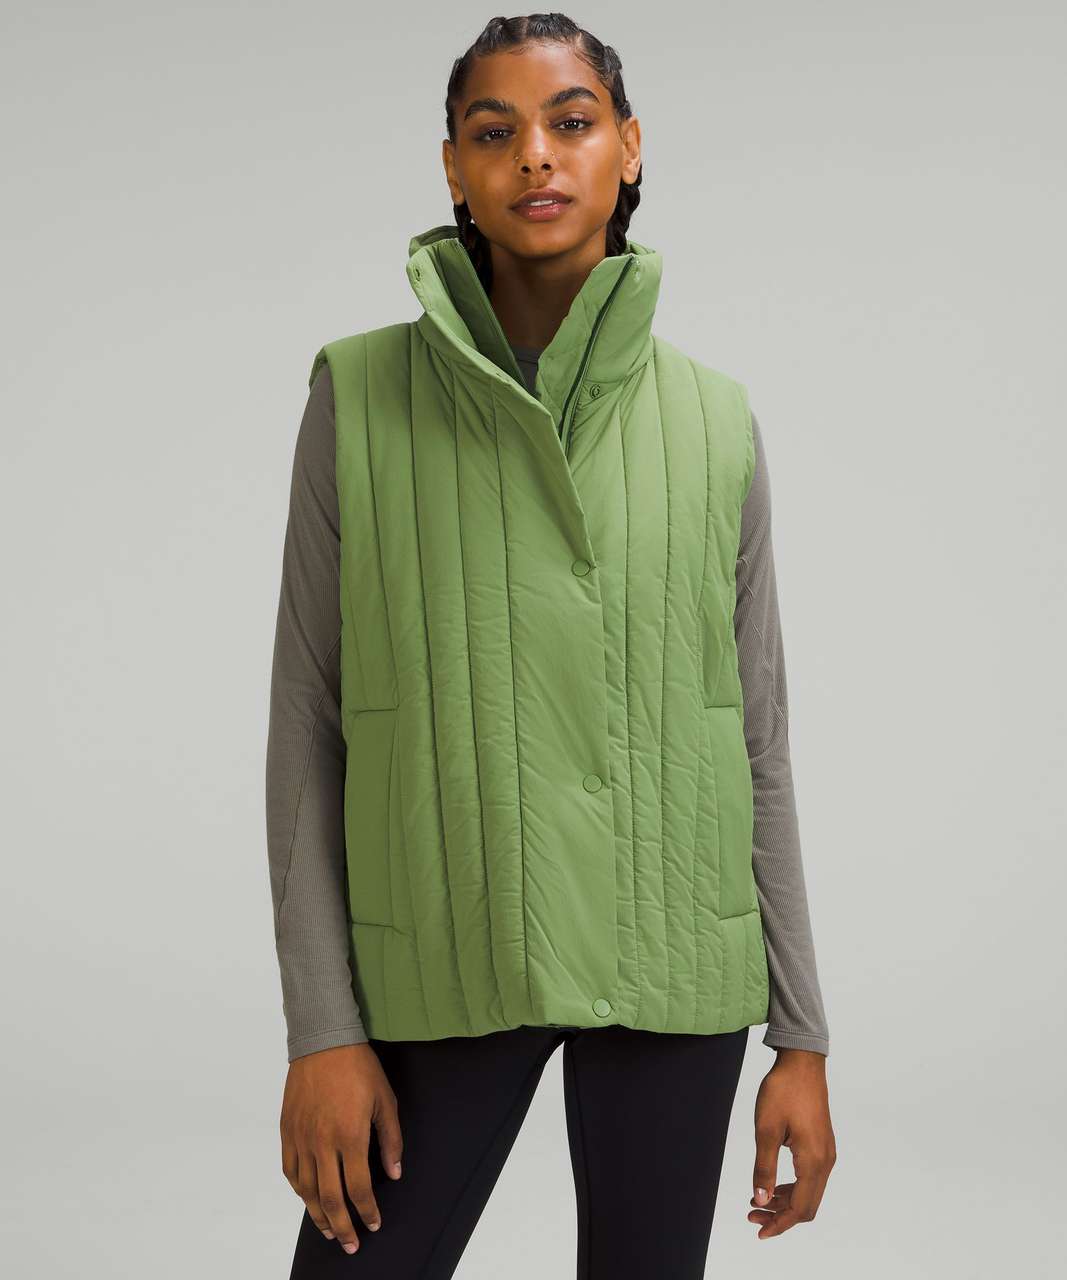 Lululemon Water-Repellent Insulated Vest - Green Foliage